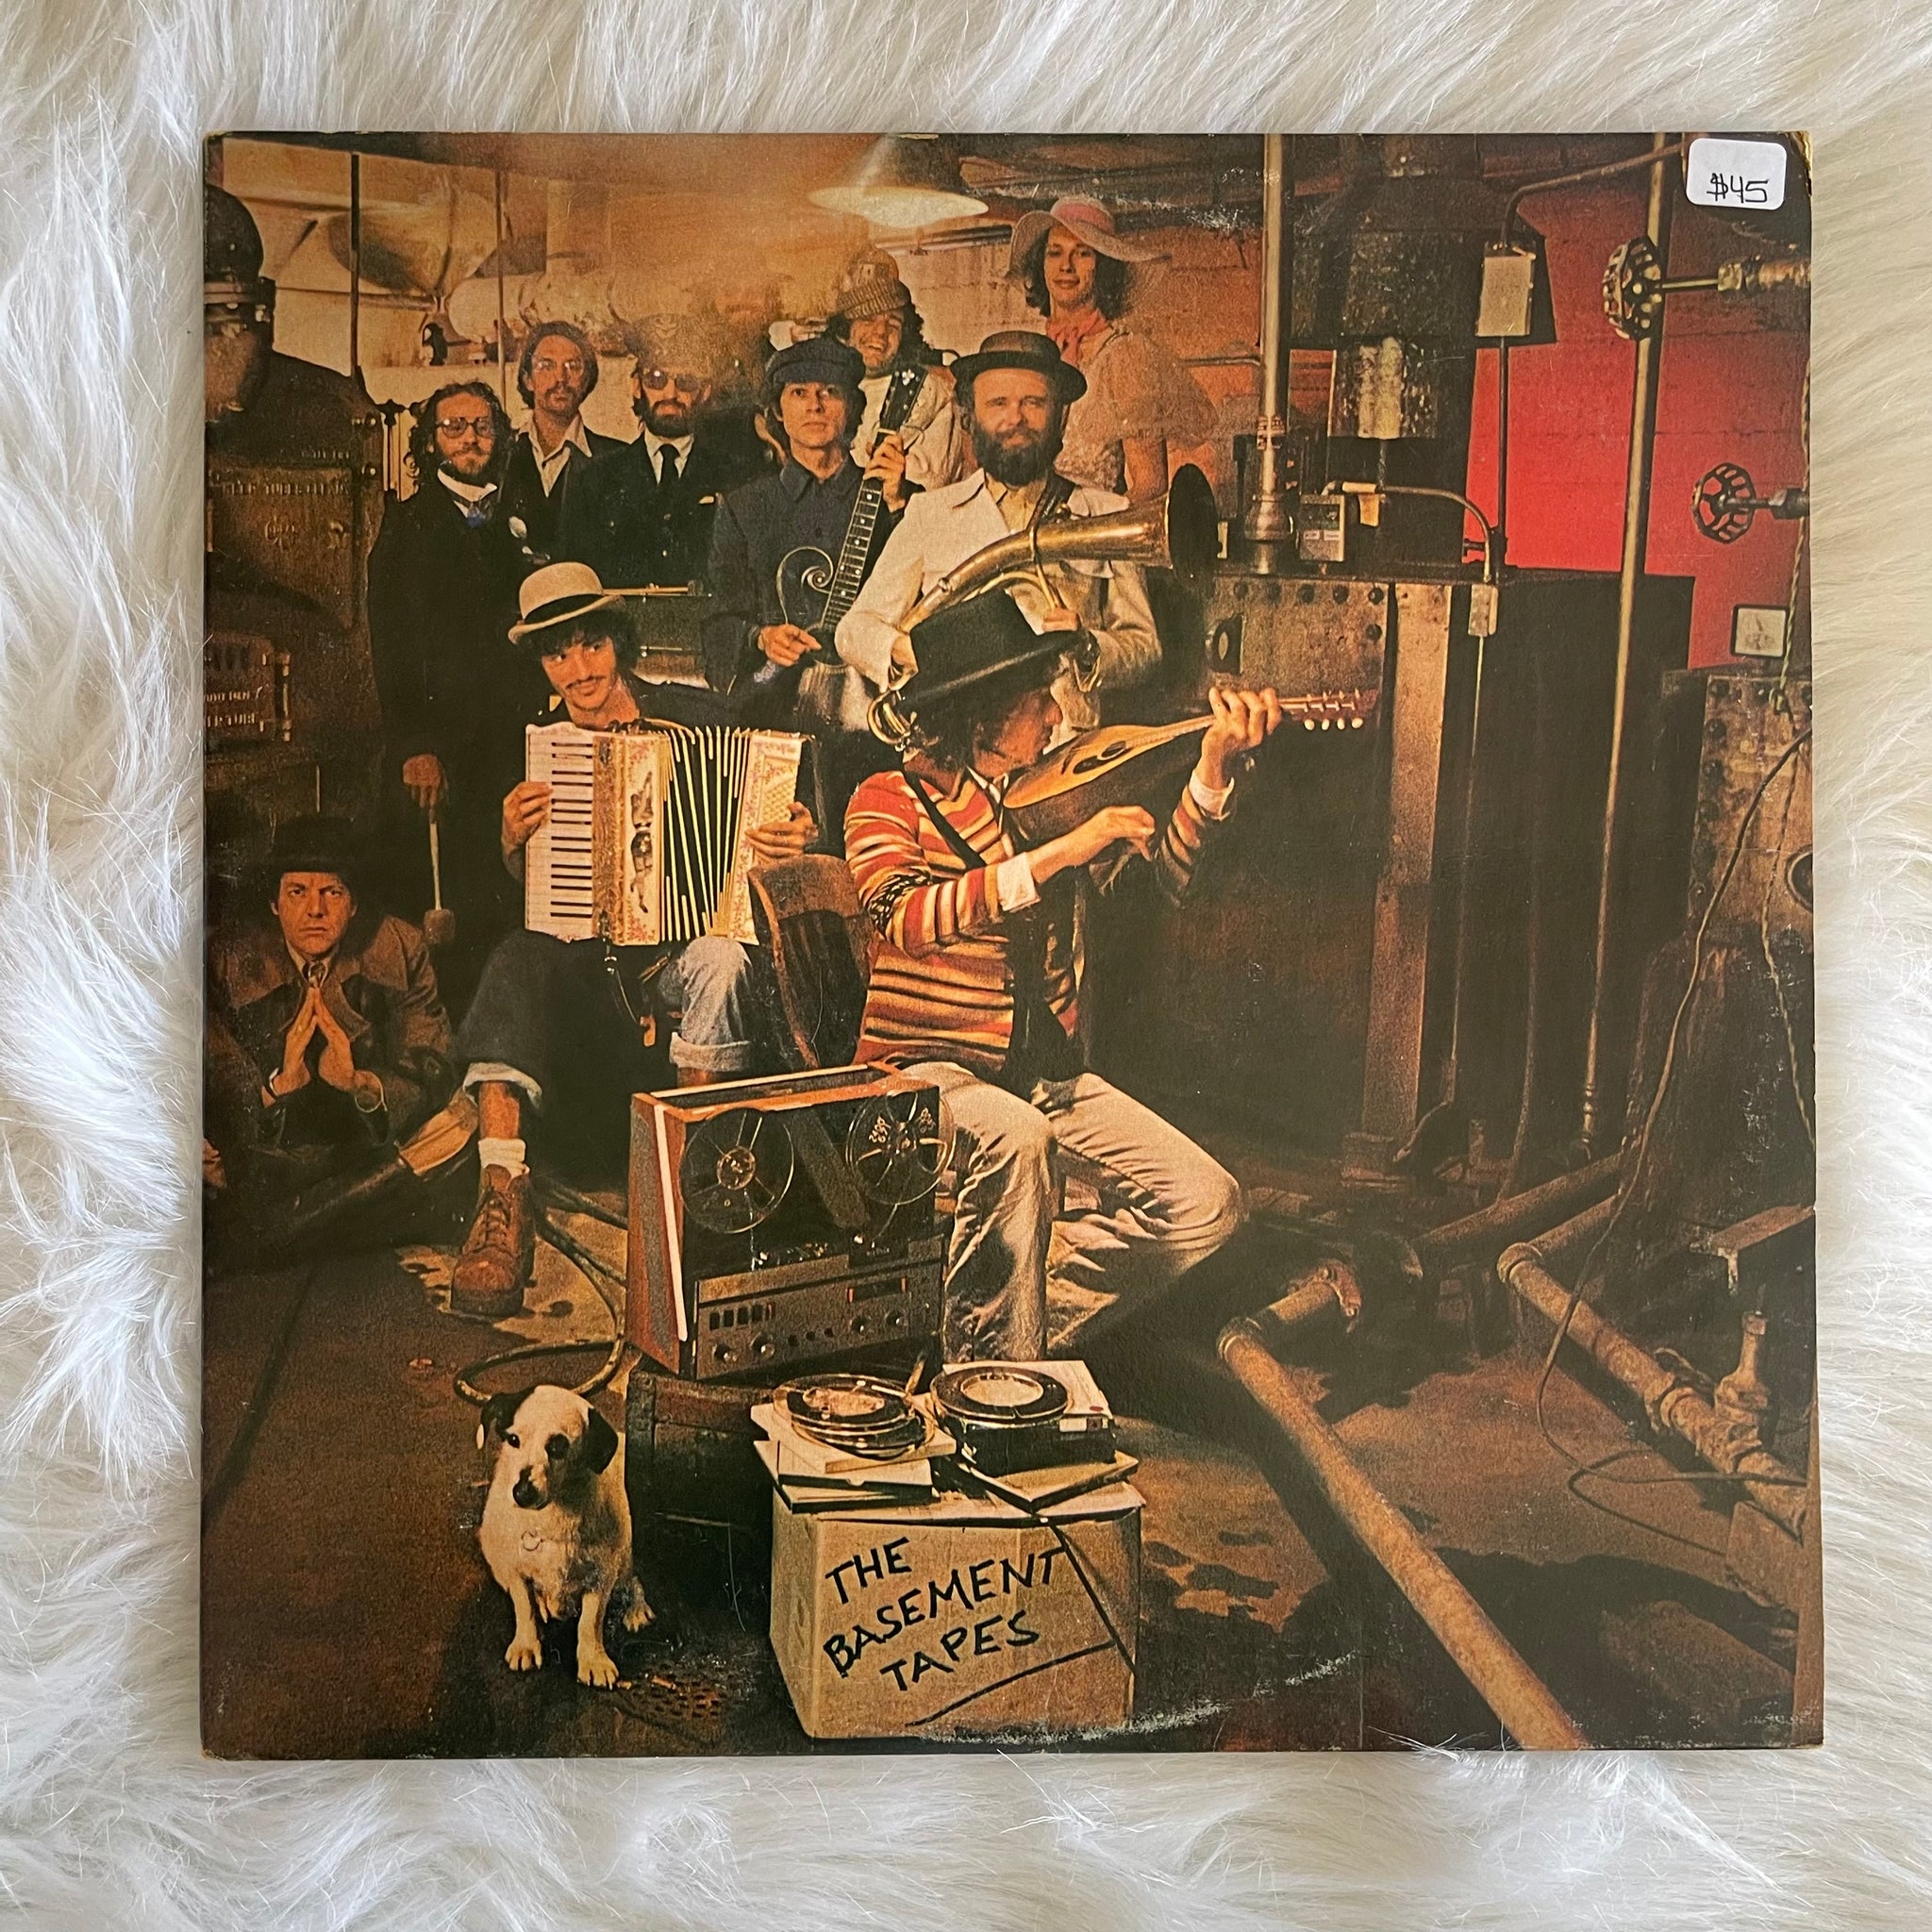 Bob Dylan and The Band-Basement Tapes